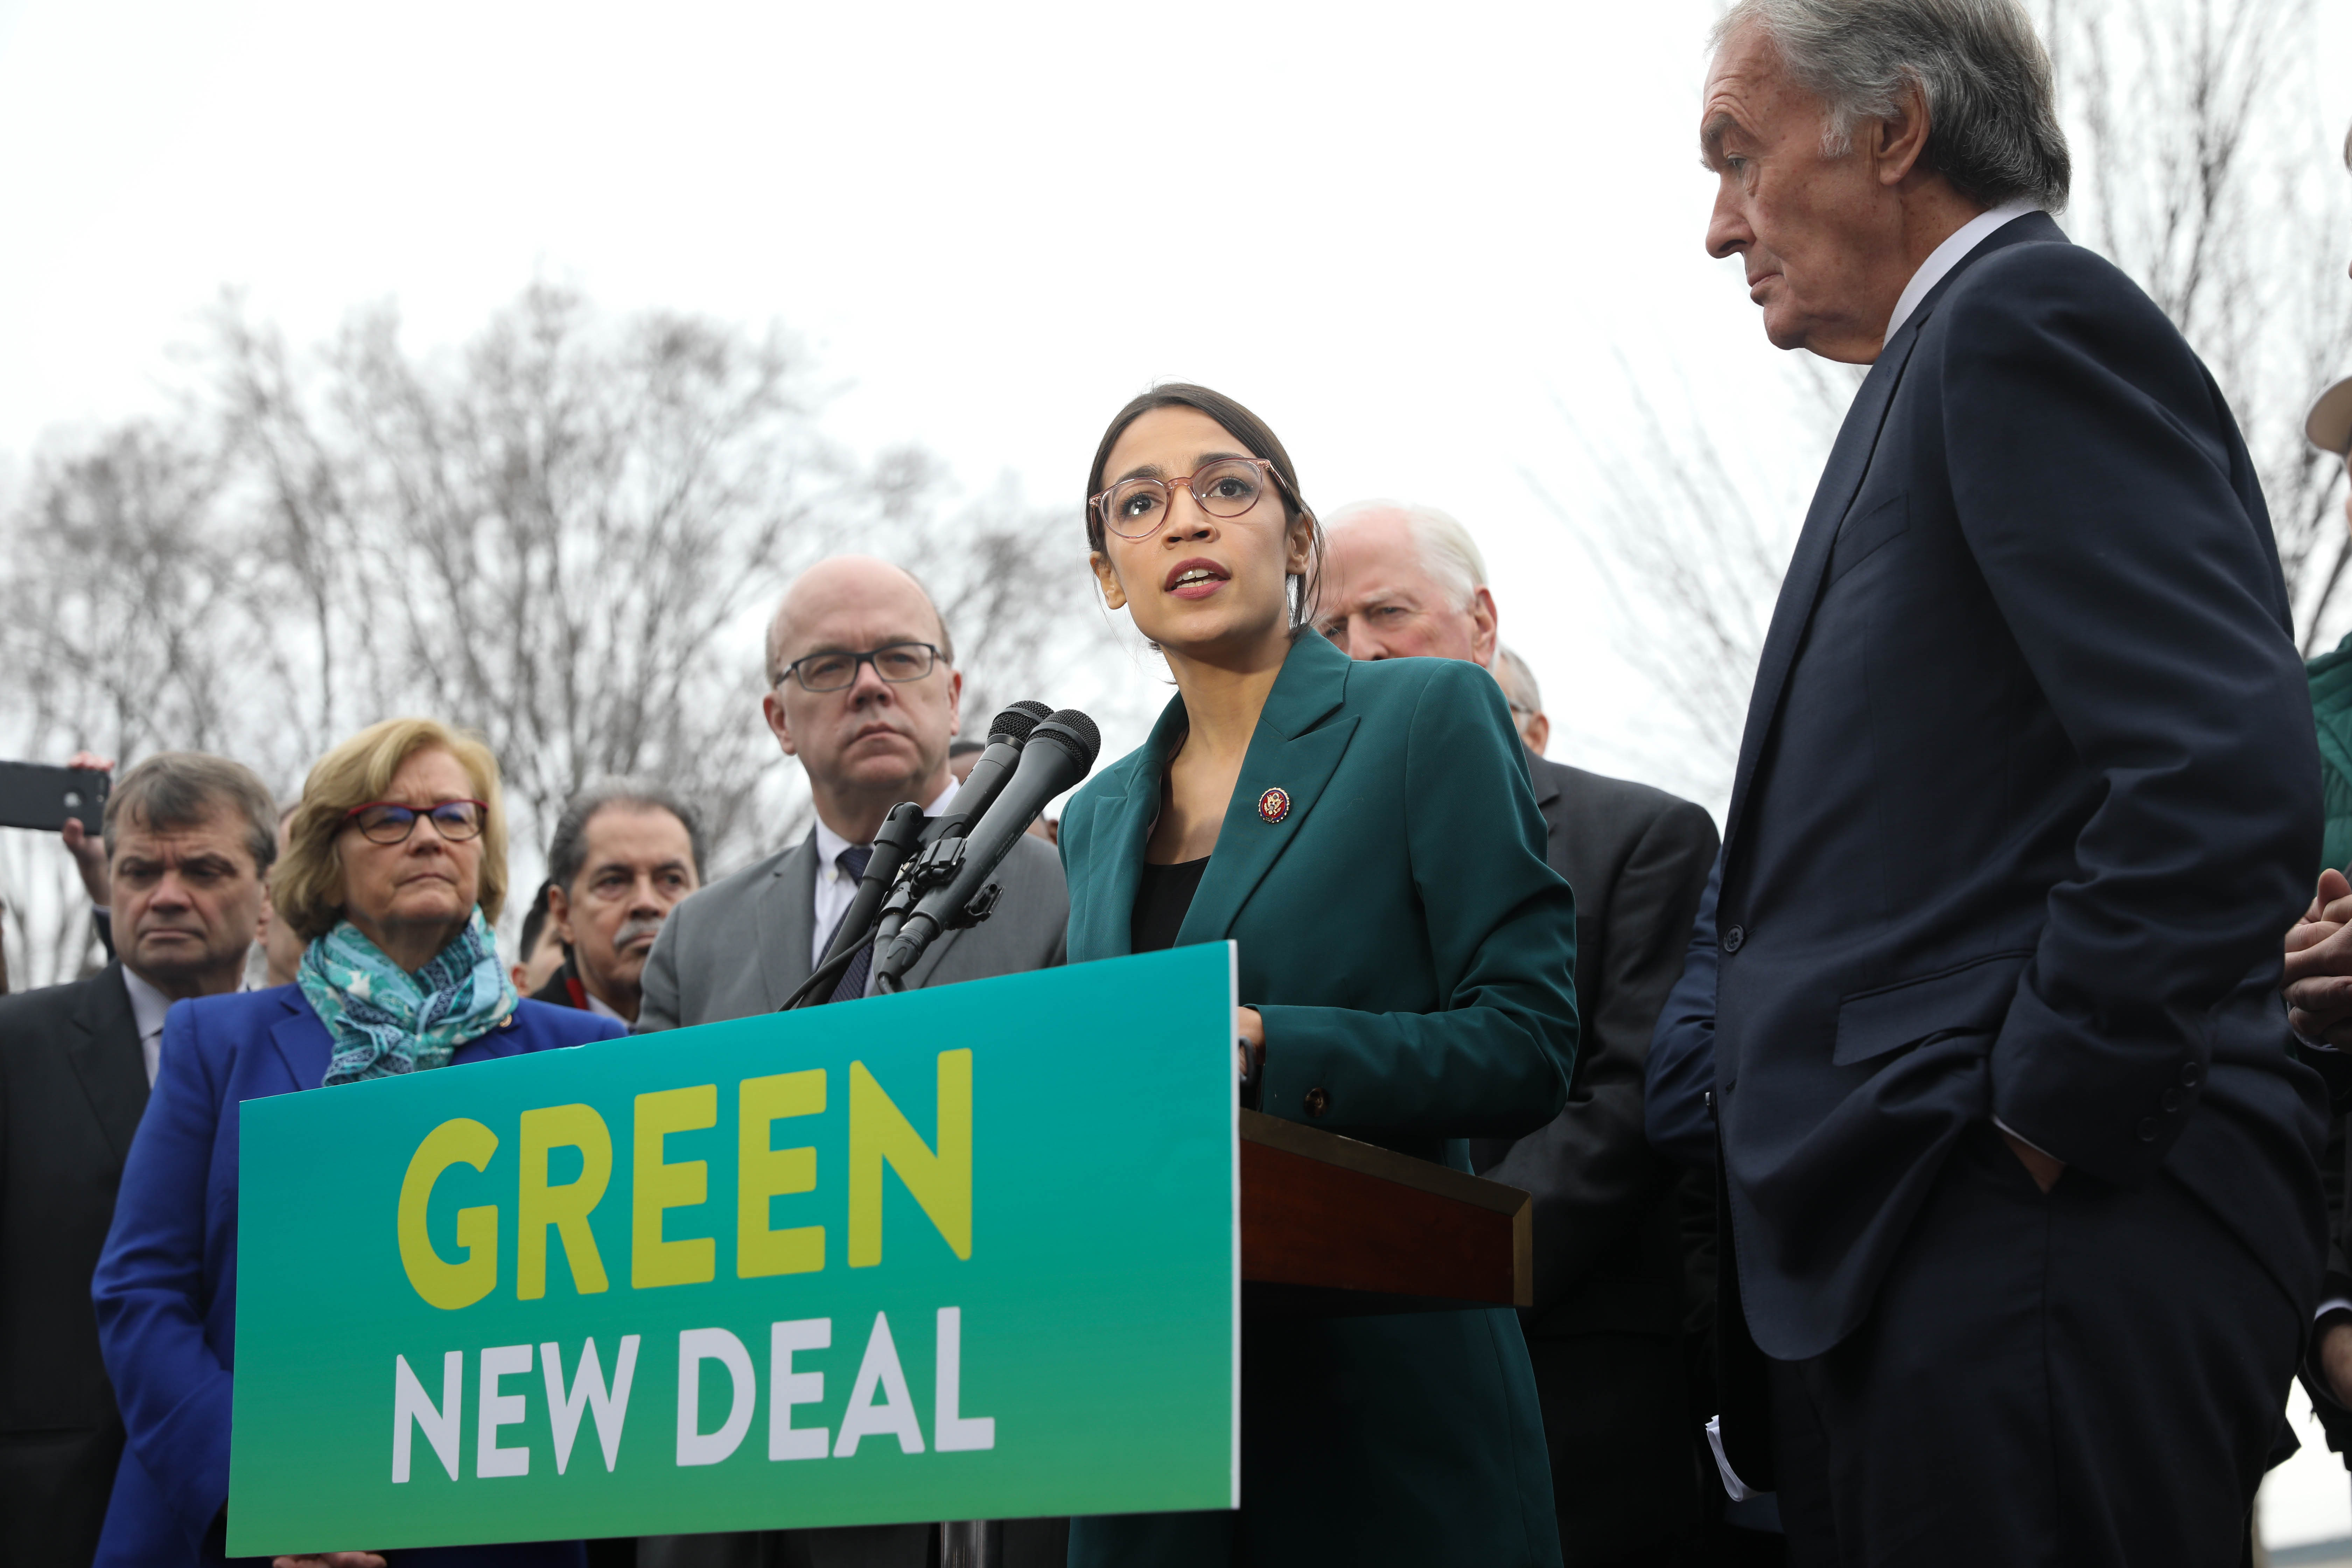 Senate and House Democrats stand at a podium while Representative Alexandria Ocasio-Cortez speaks into a microphone about the Green New Deal and climate change legislation.